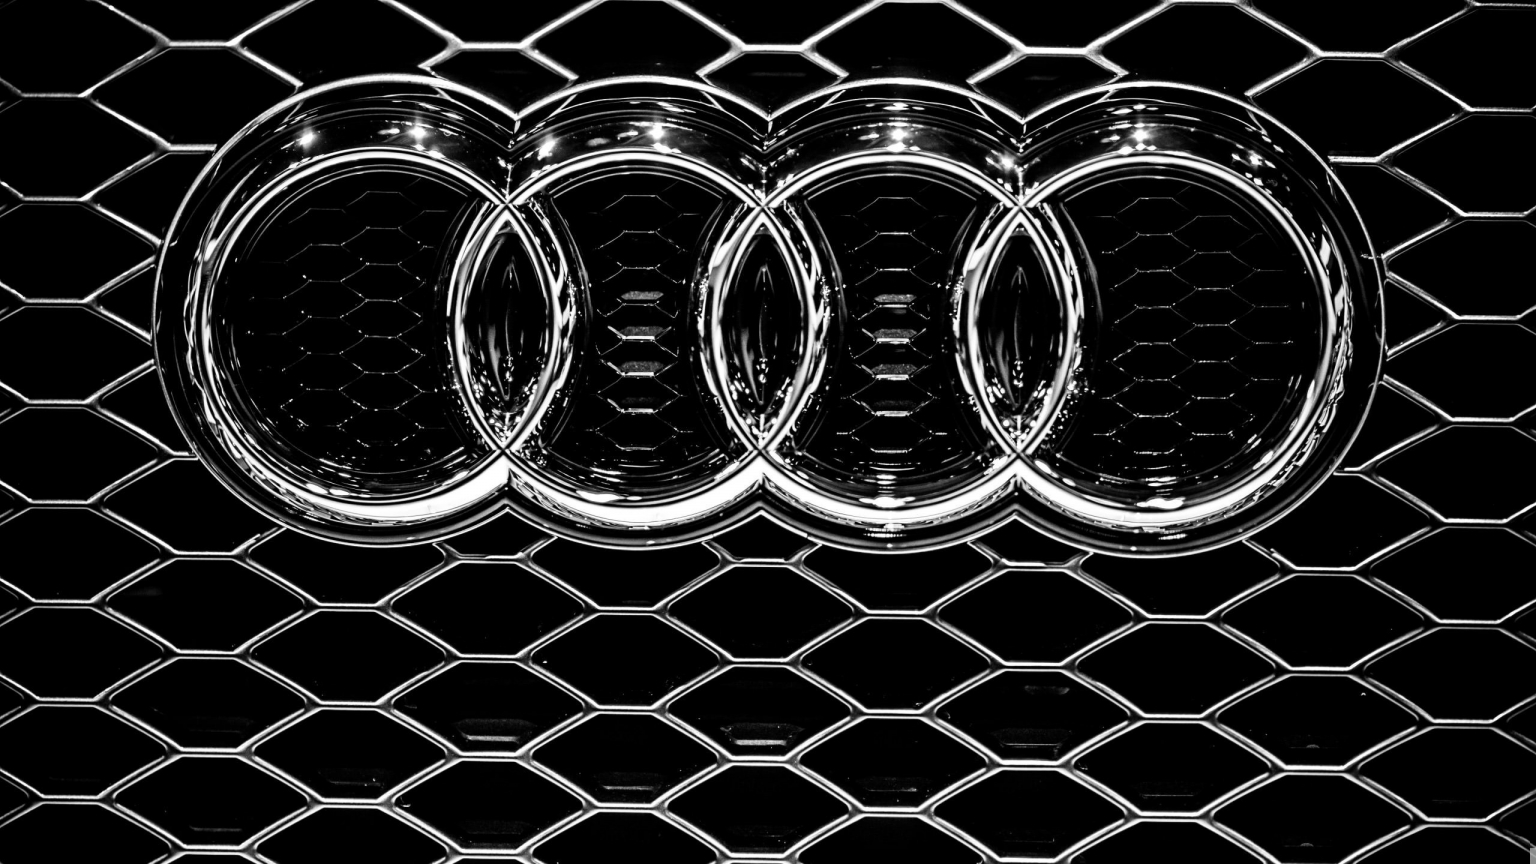 Audi Grille for 1536 x 864 HDTV resolution